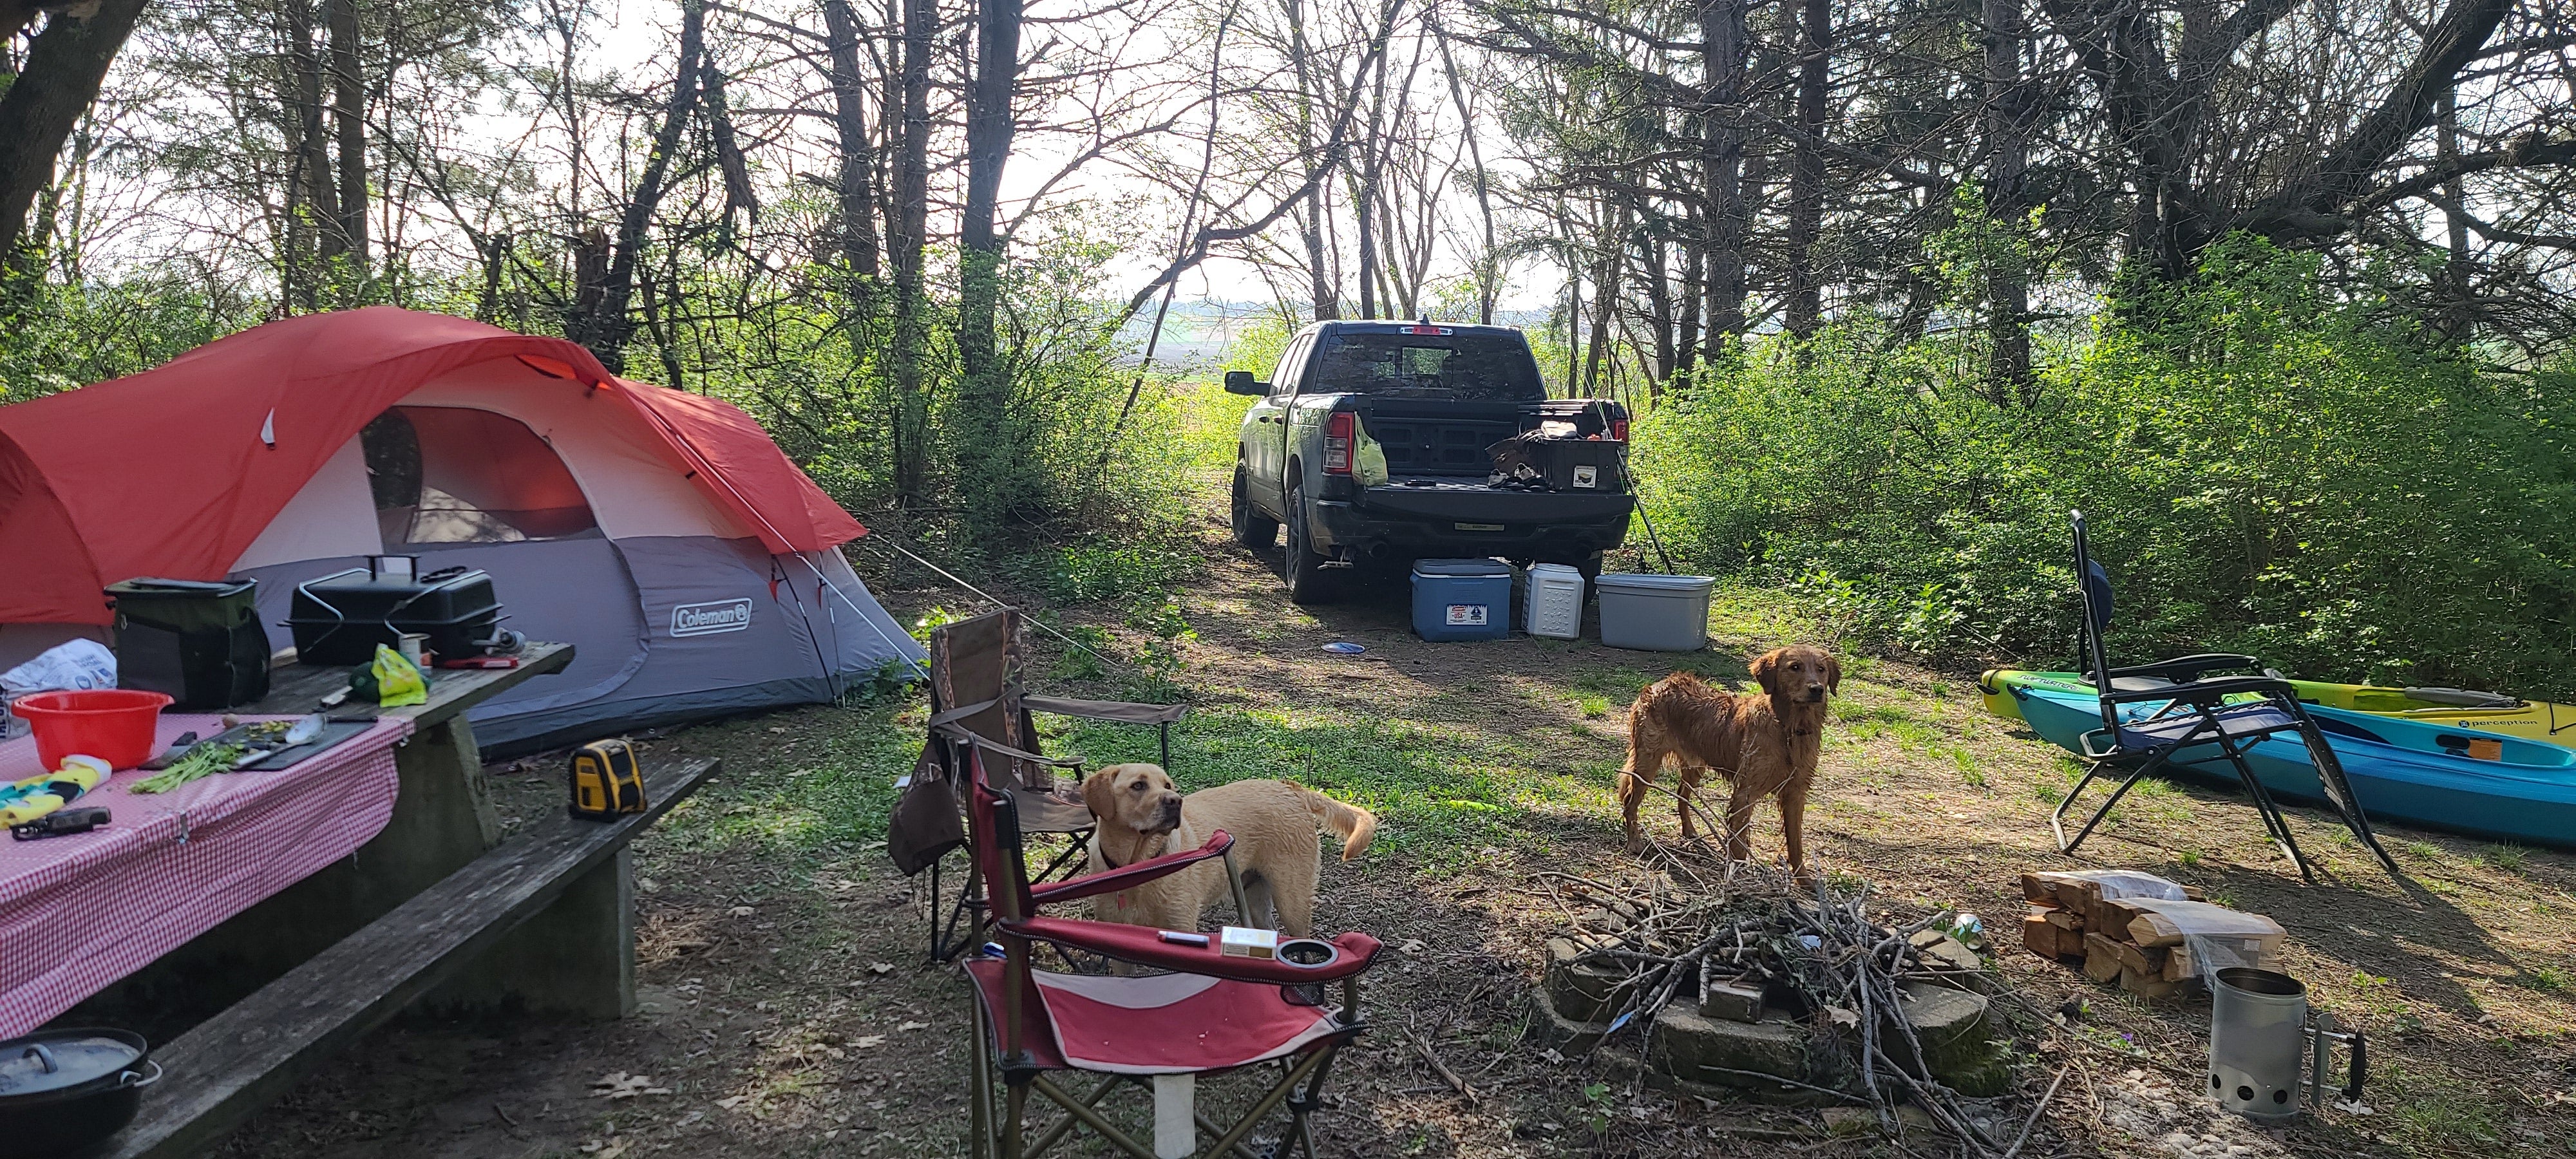 Camper submitted image from Worthington Sportsman's Club - Members Only - 1